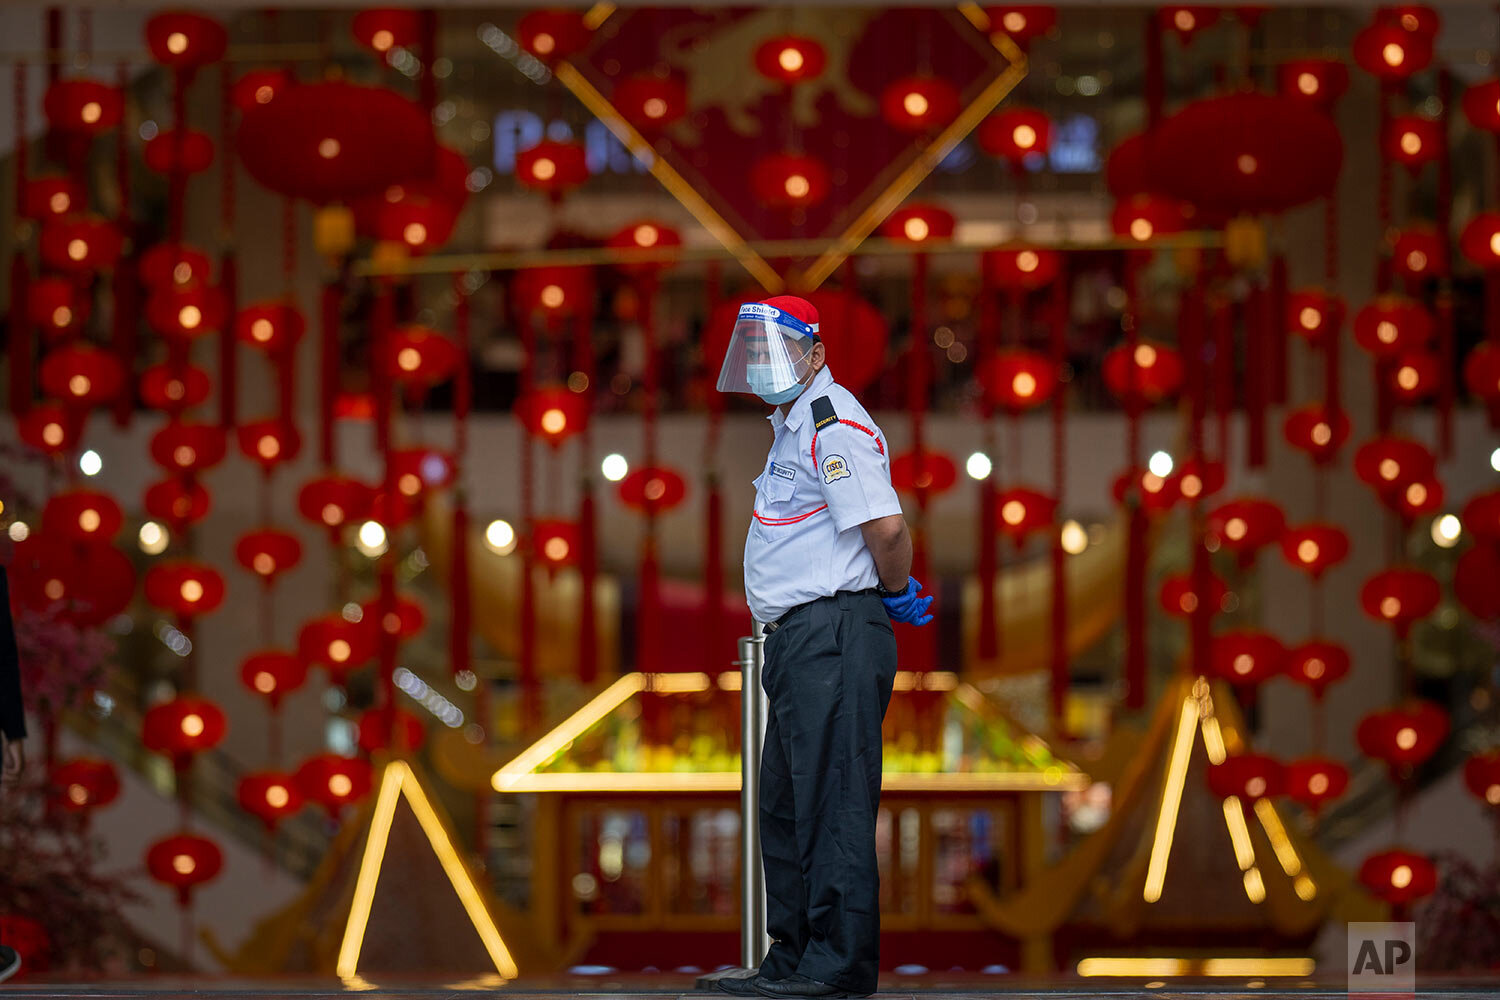  A security person wearing a face shield and face mask guards at the entrance of a shopping mall in Kuala Lumpur, Malaysia Thursday, Jan. 14, 2021. (AP Photo/Vincent Thian) 